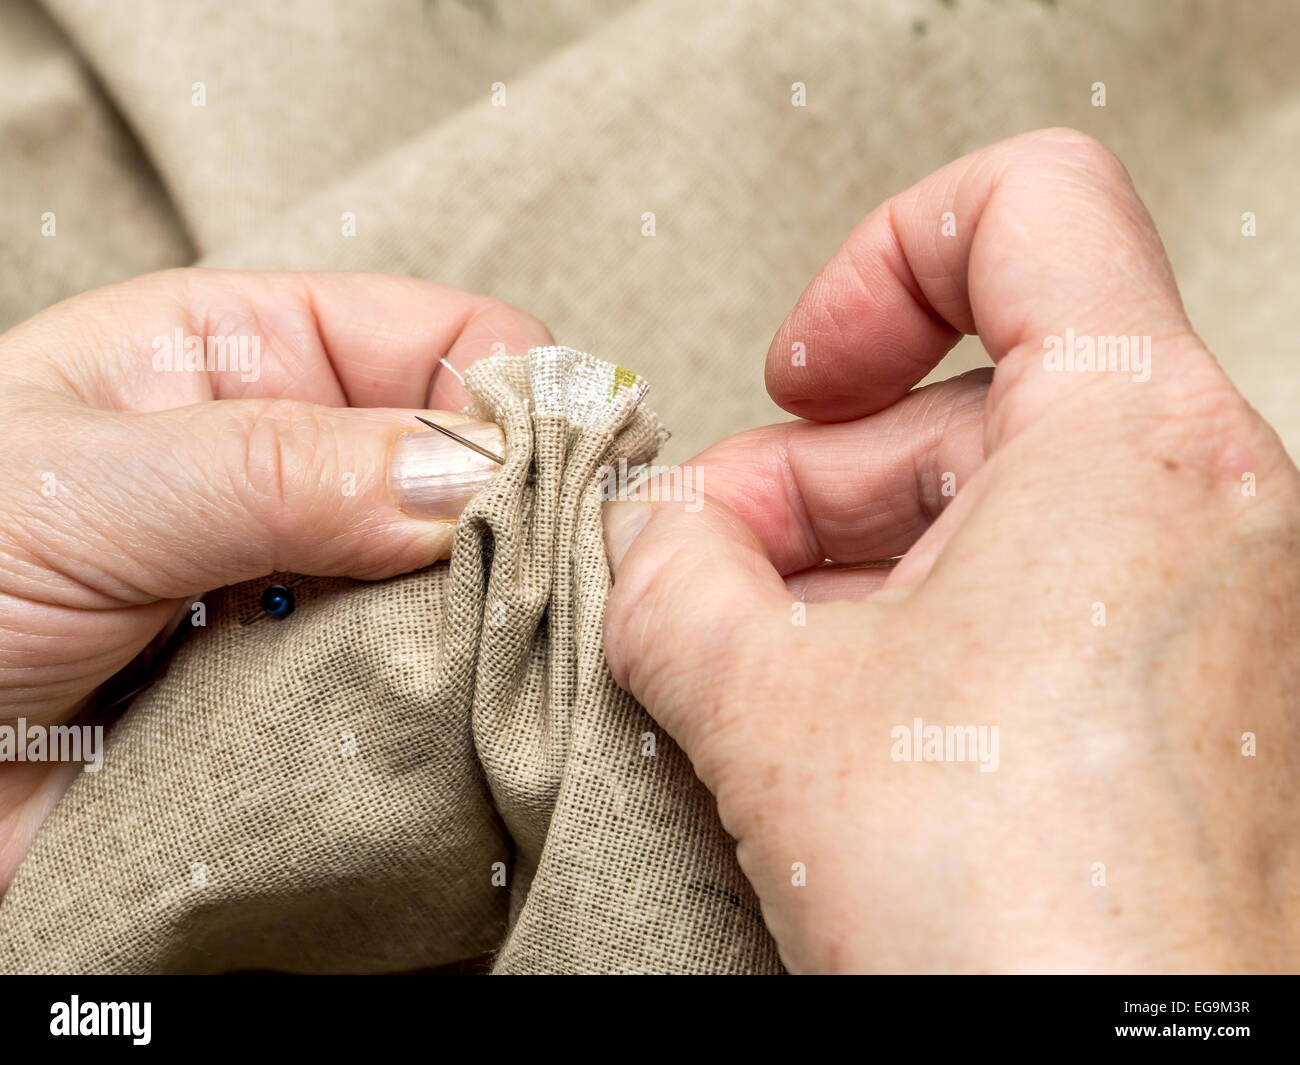 Closeup of senior woman's hands basting linen border with needle and thread Stock Photo